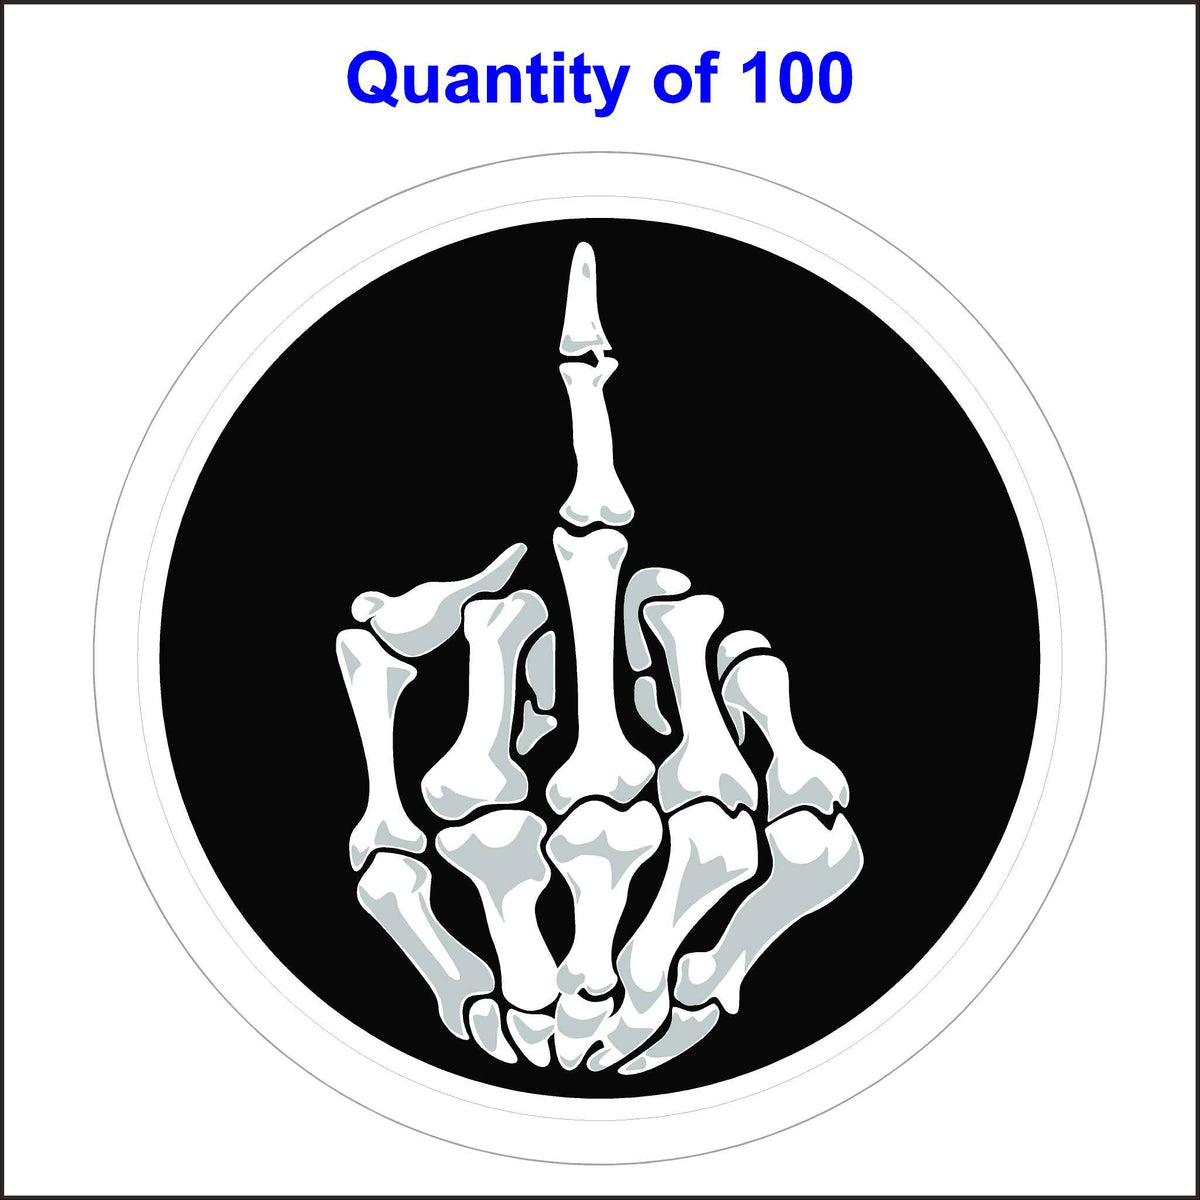 100 Quantity of This Skeleton Middle Finger Sticker.